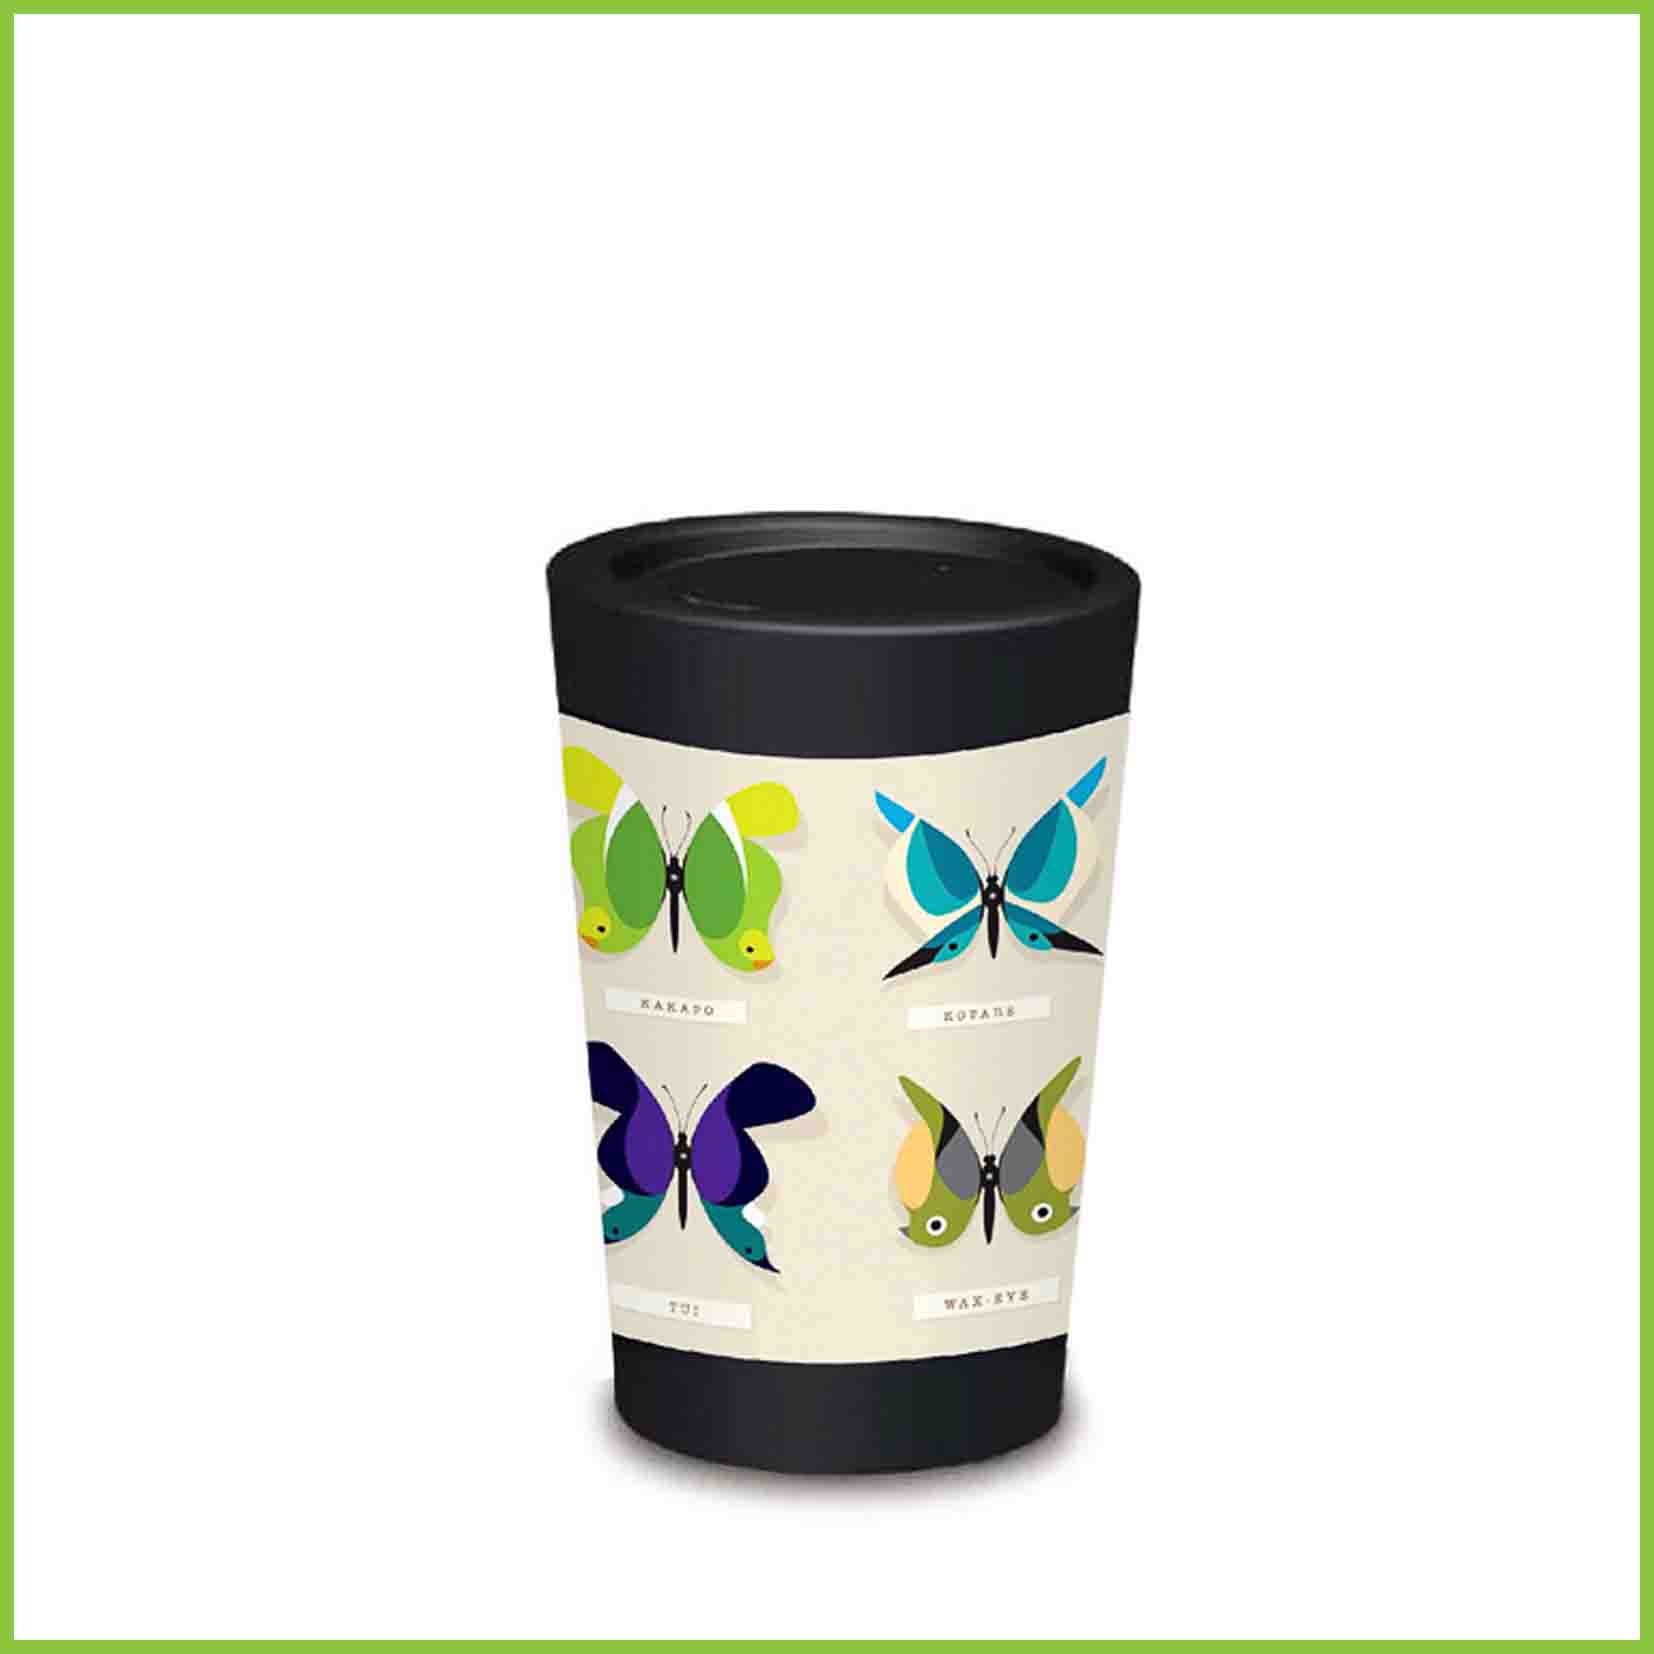 A lightweight reusable cup from CuppaCoffeeCup with a rare butterfly specimens design.